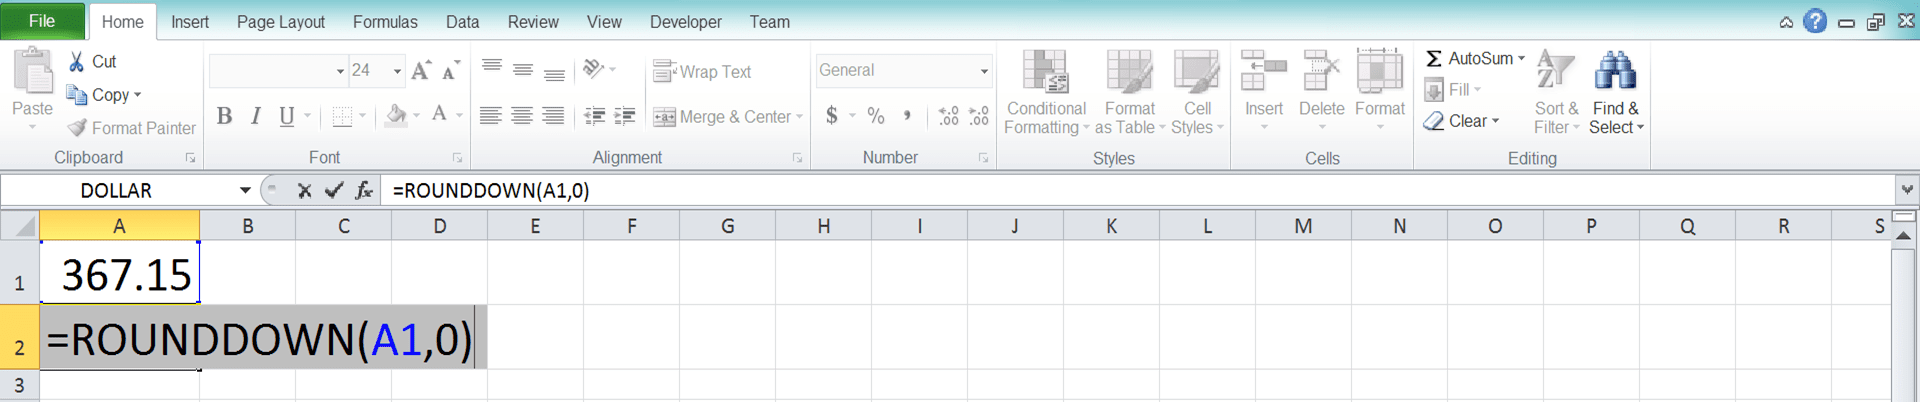 Excel ROUNDDOWN Formula: Functions, Examples, and How to Use - Screenshot of Step 5